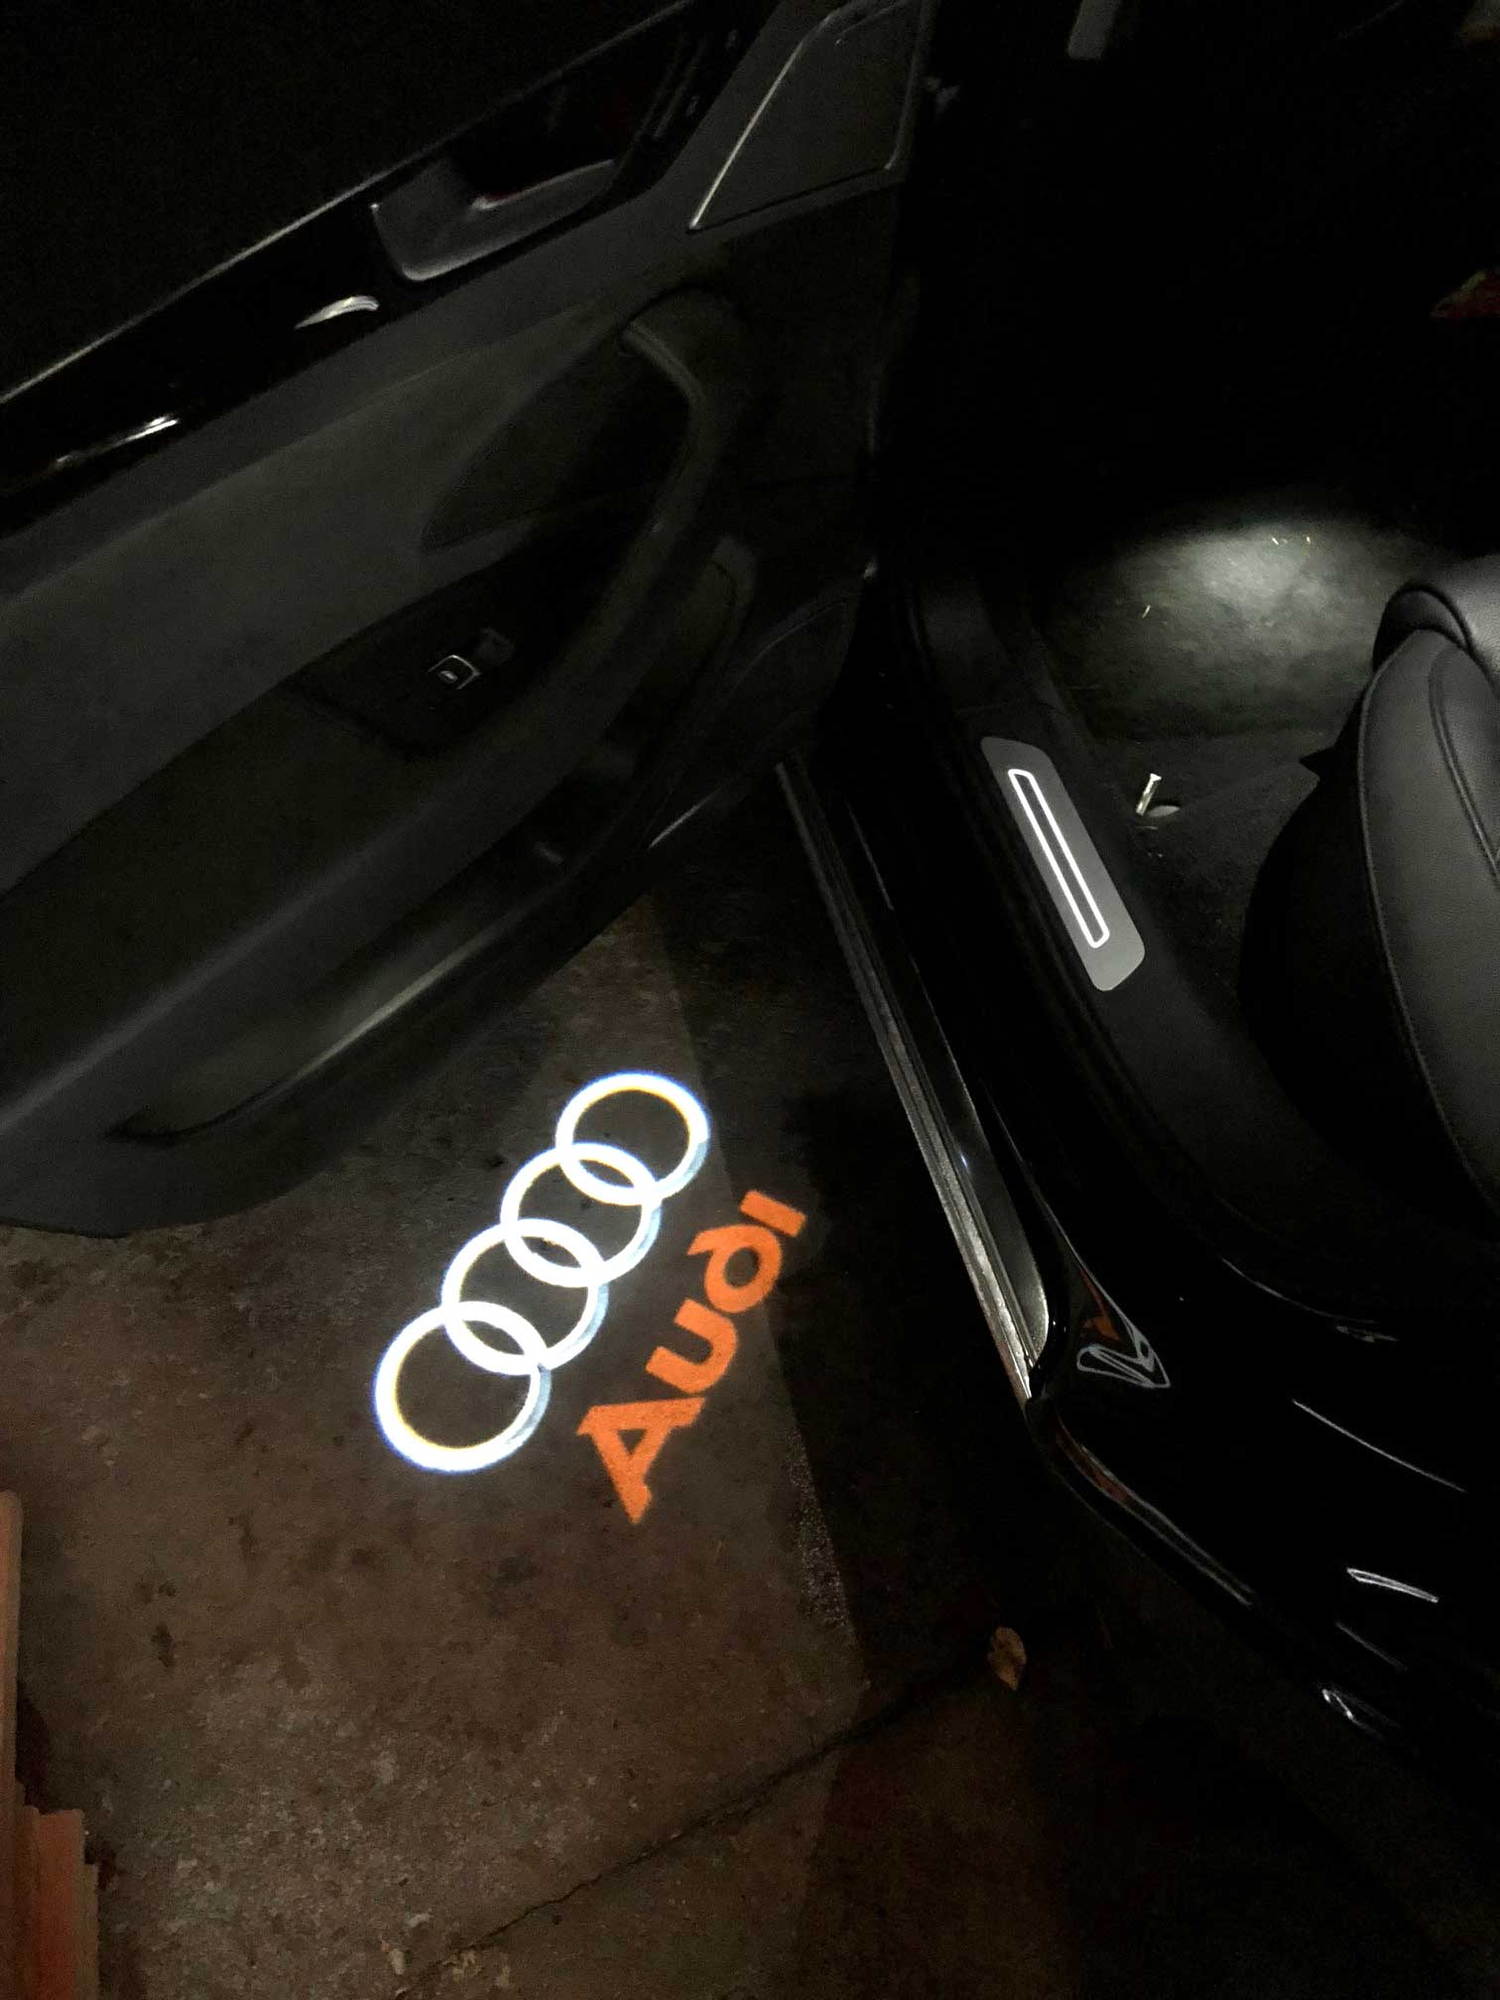 Puddle Lamps Now Project Audi logo + Rings - AudiWorld Forums